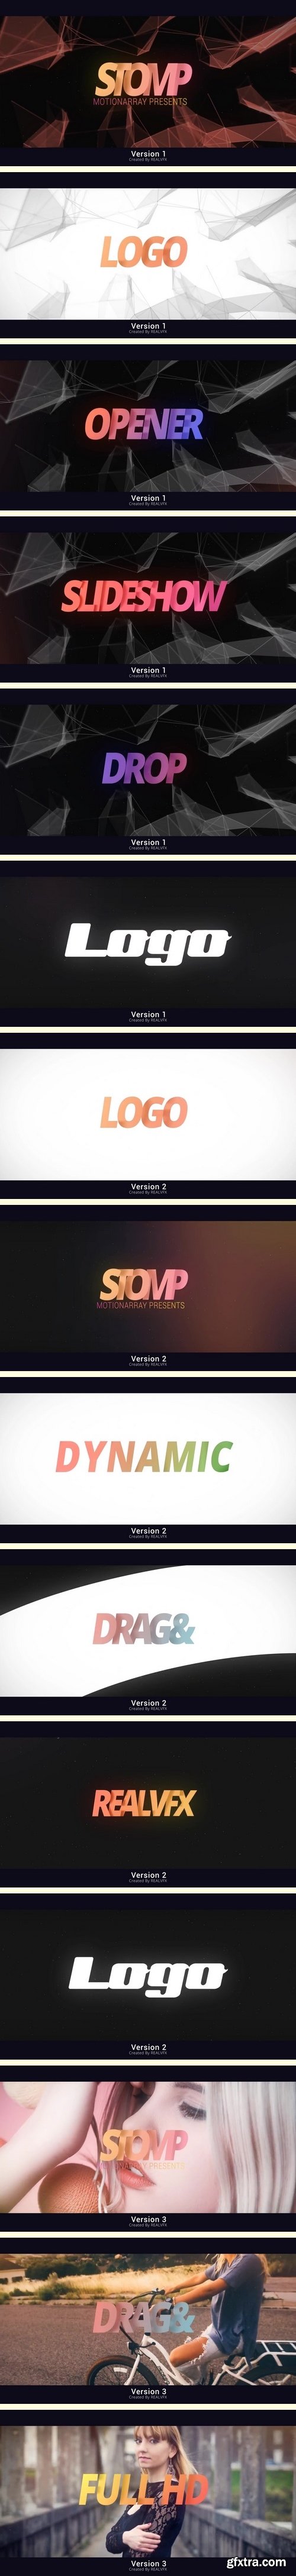 MotionArray - Stomp Opener After Effects Templates 57962